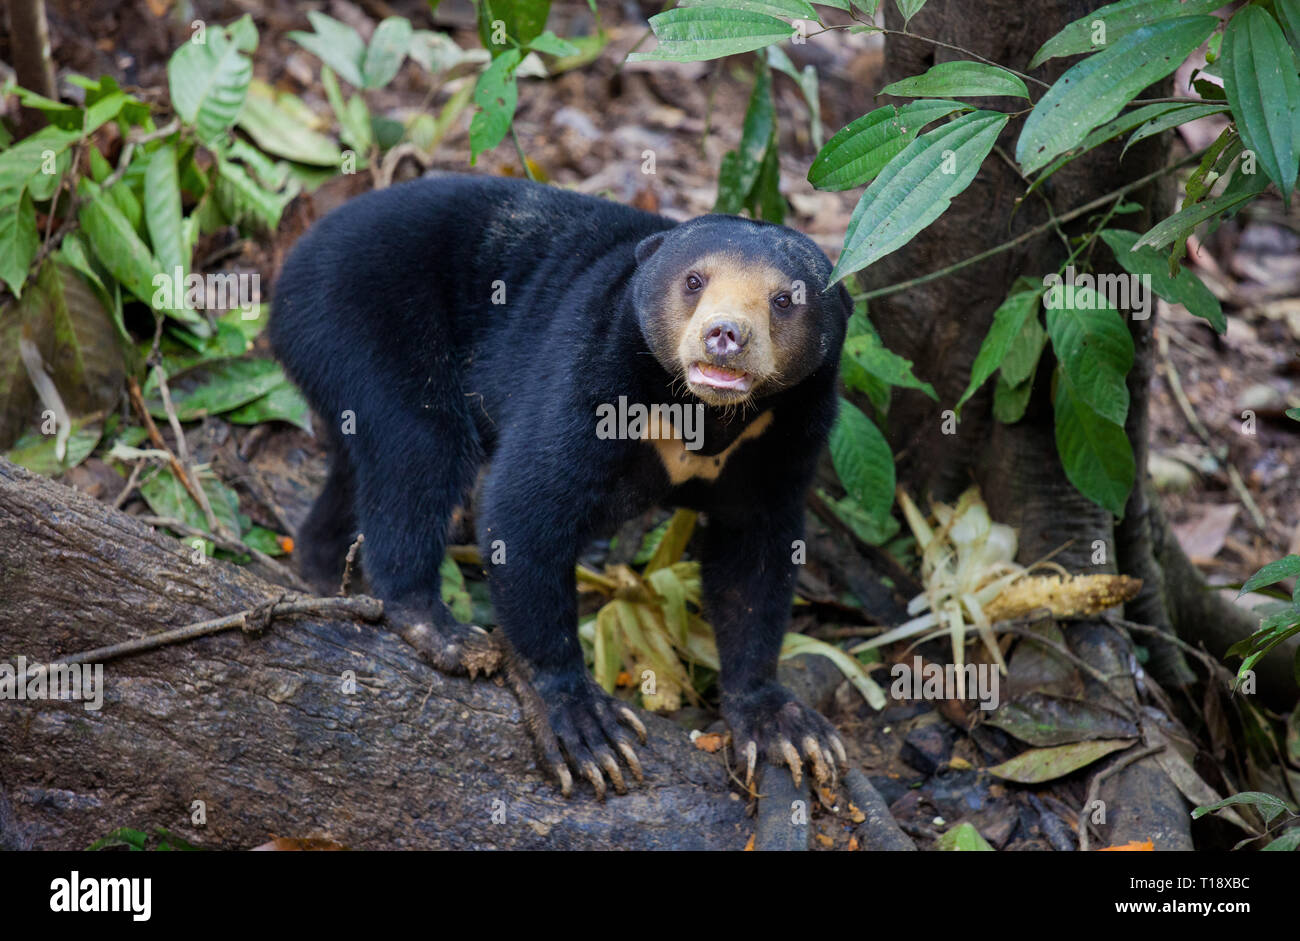 Sun bear, Helarctos malayanus, the smallest bear in the world, the sun bear native to the rainforests of South east Asia, a very talented tree climber Stock Photo